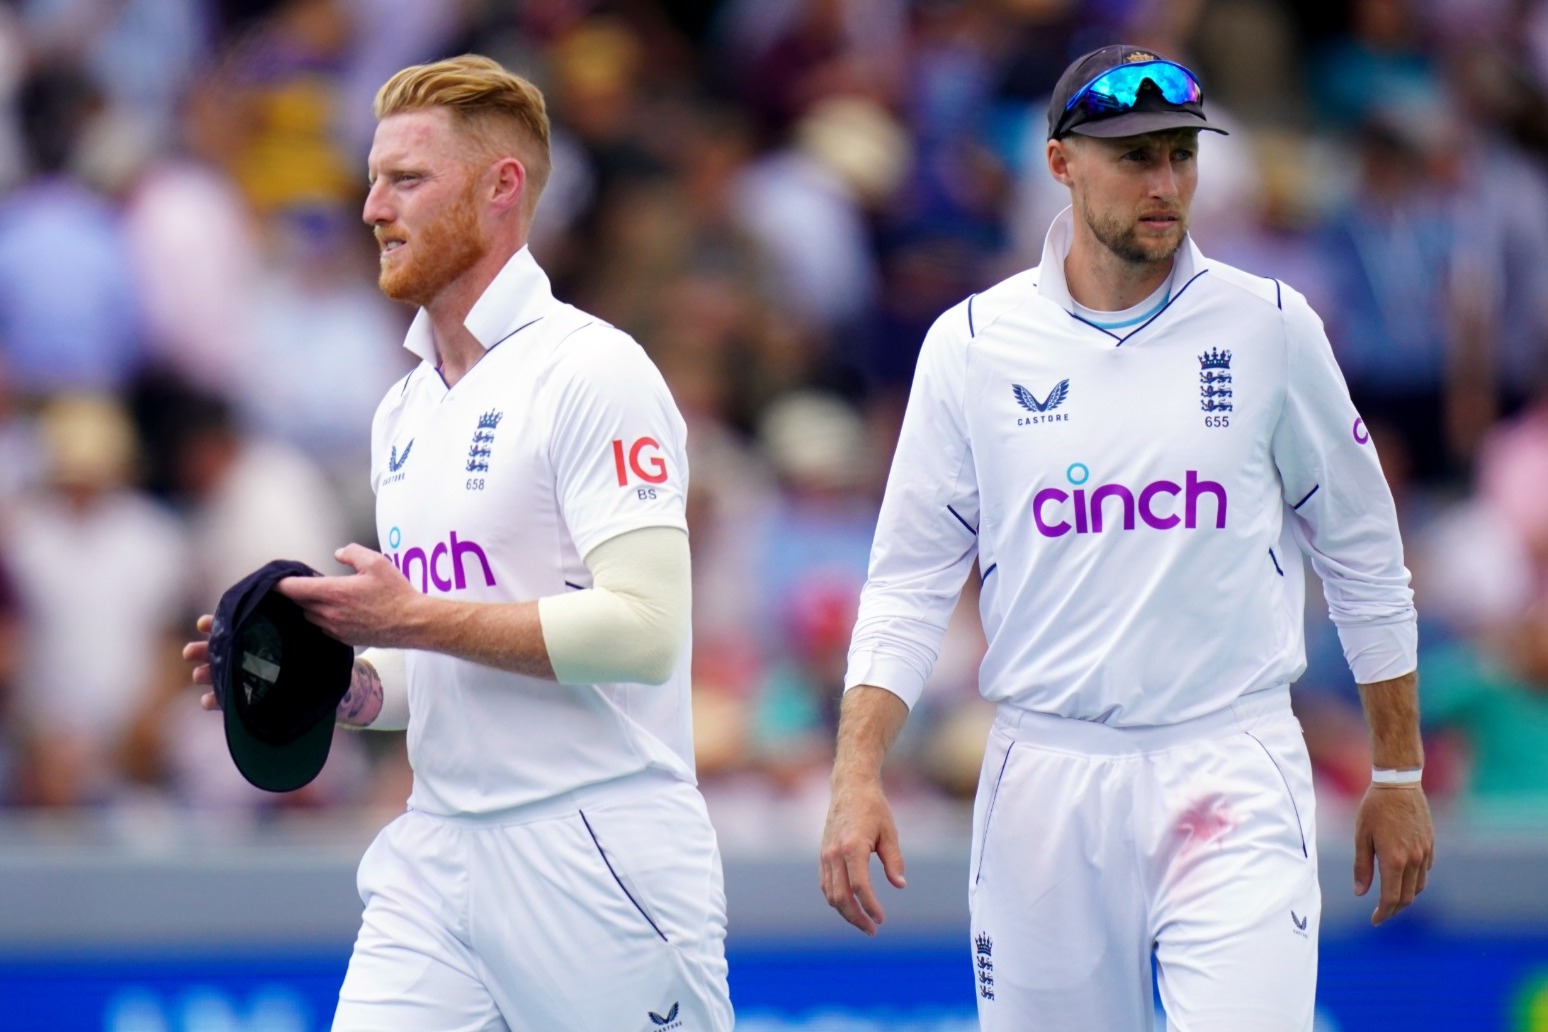 England dismiss New Zealand for 132 on opening day of Lord’s Test 